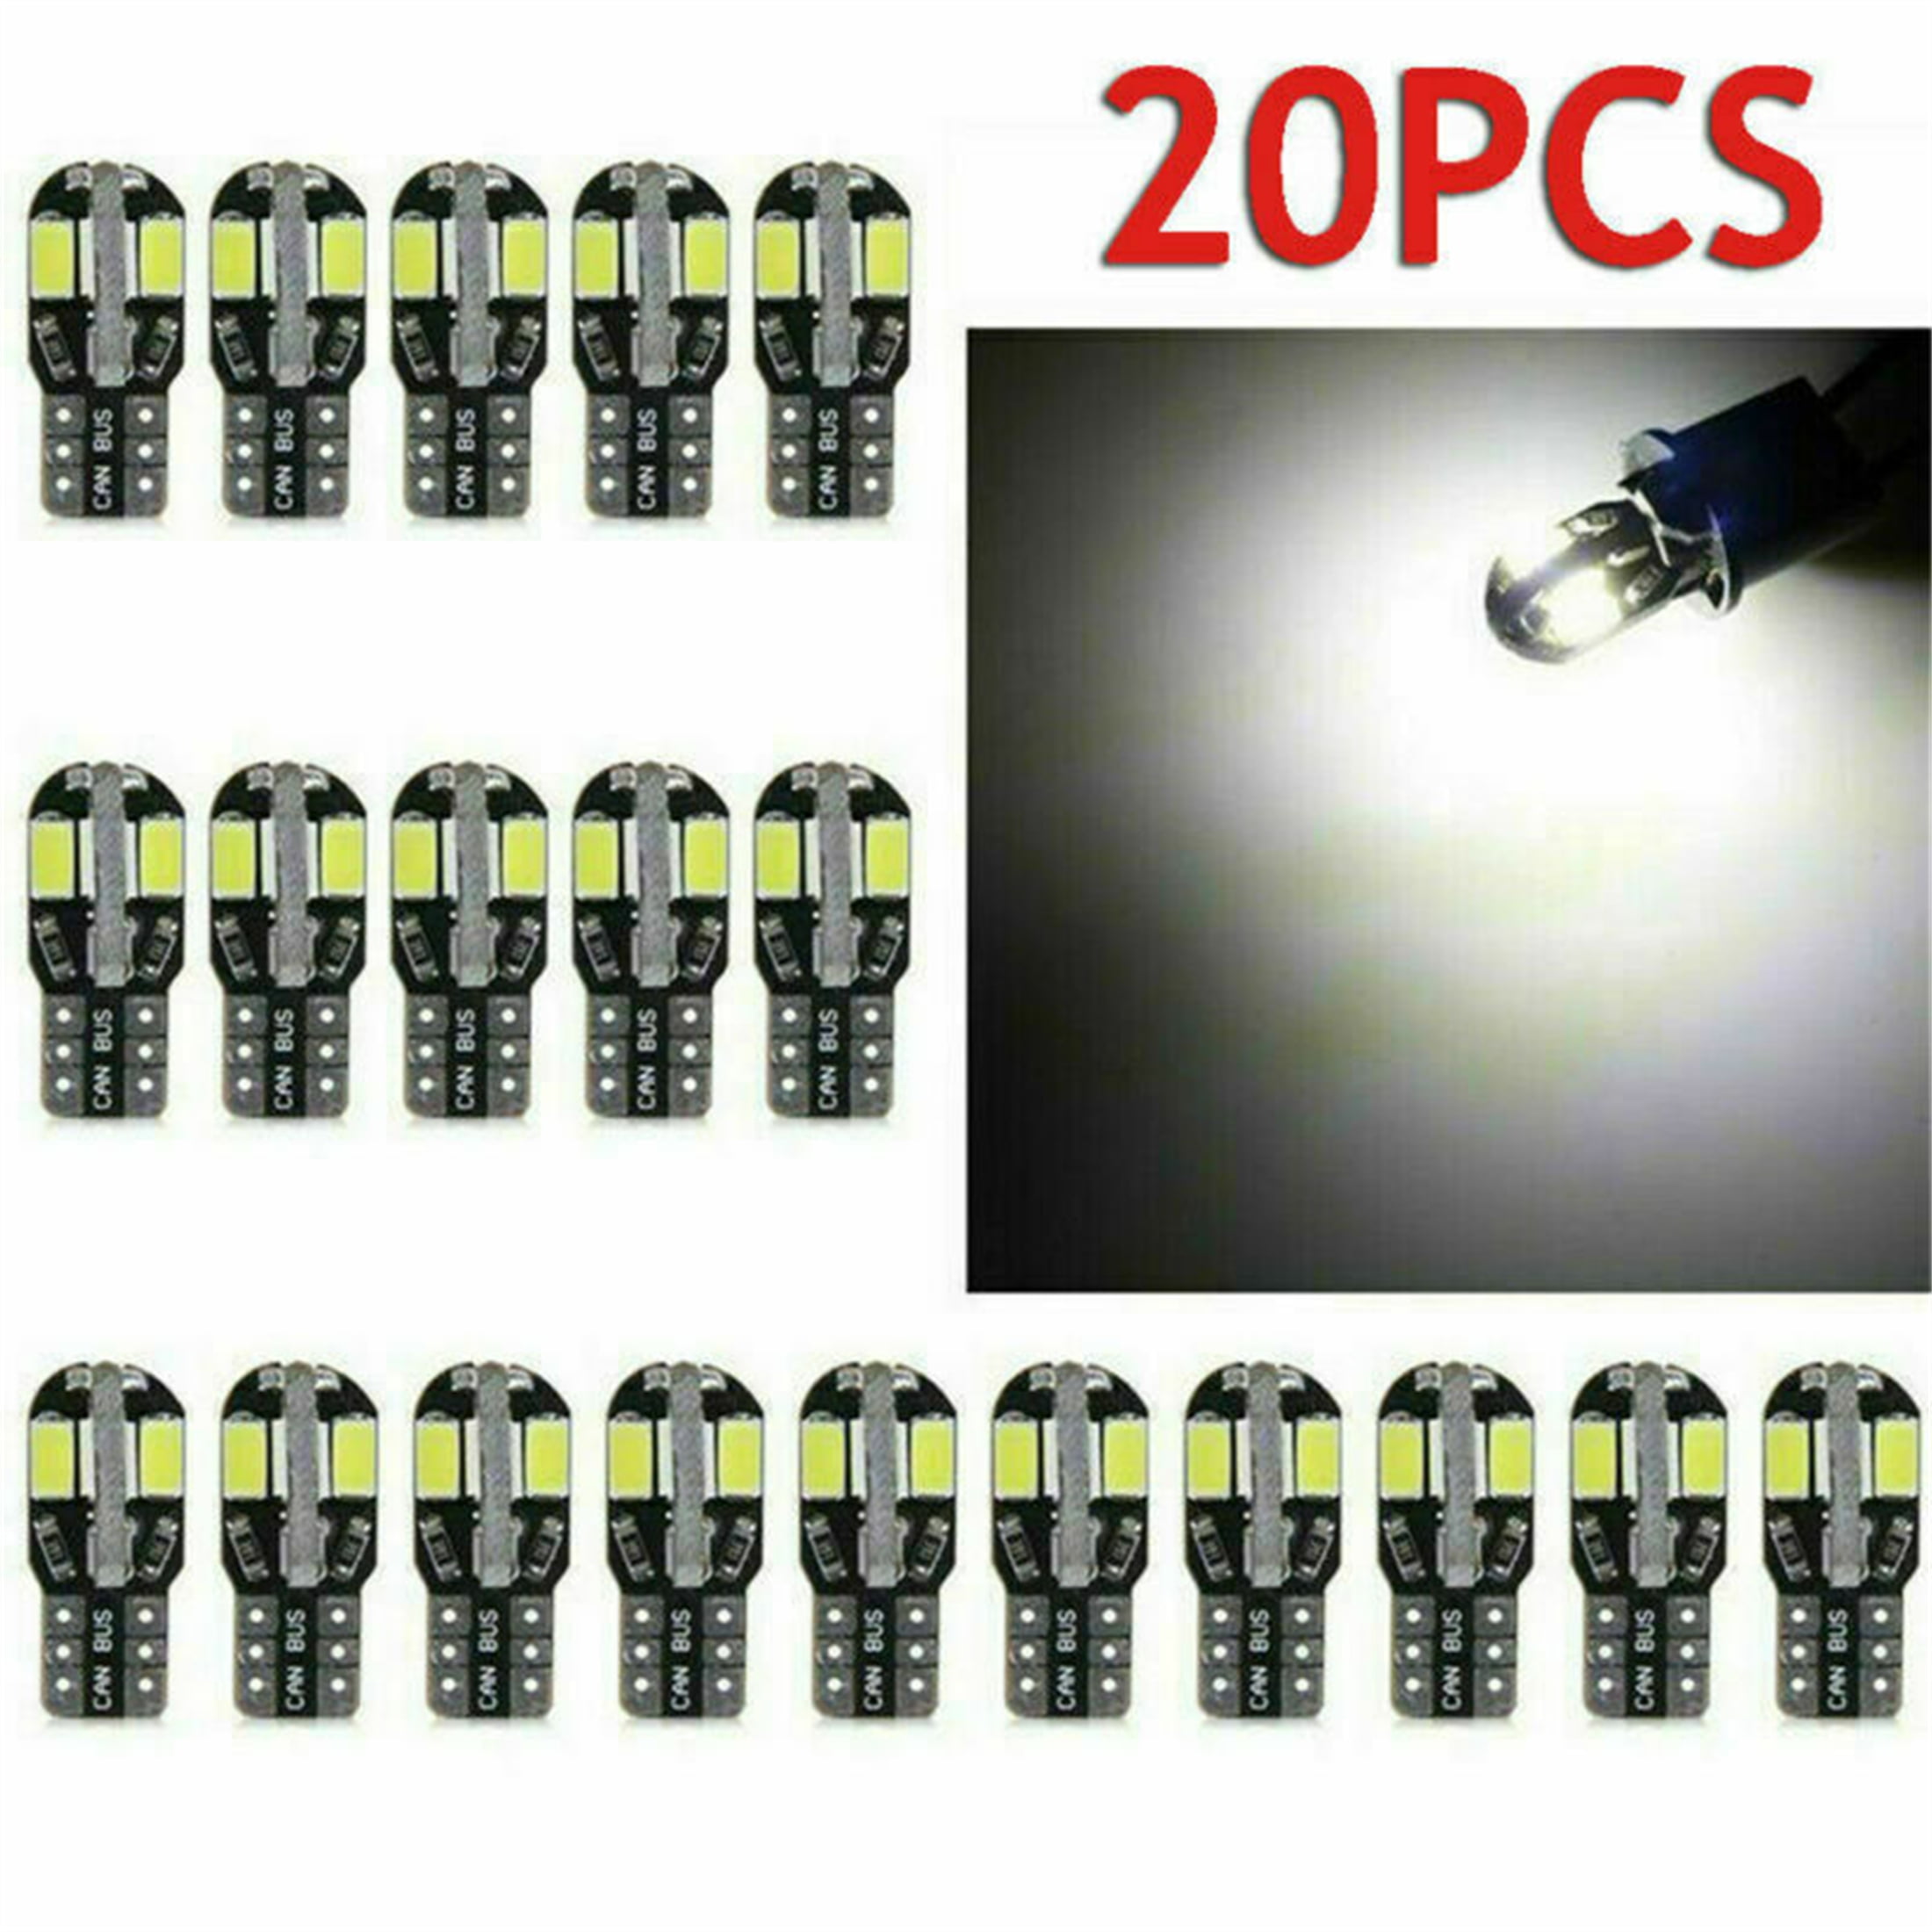 20 x Canbus T10 194 168 W5W 5730 8 LED SMD White Car Side Wedge Light Lamp Bulb 